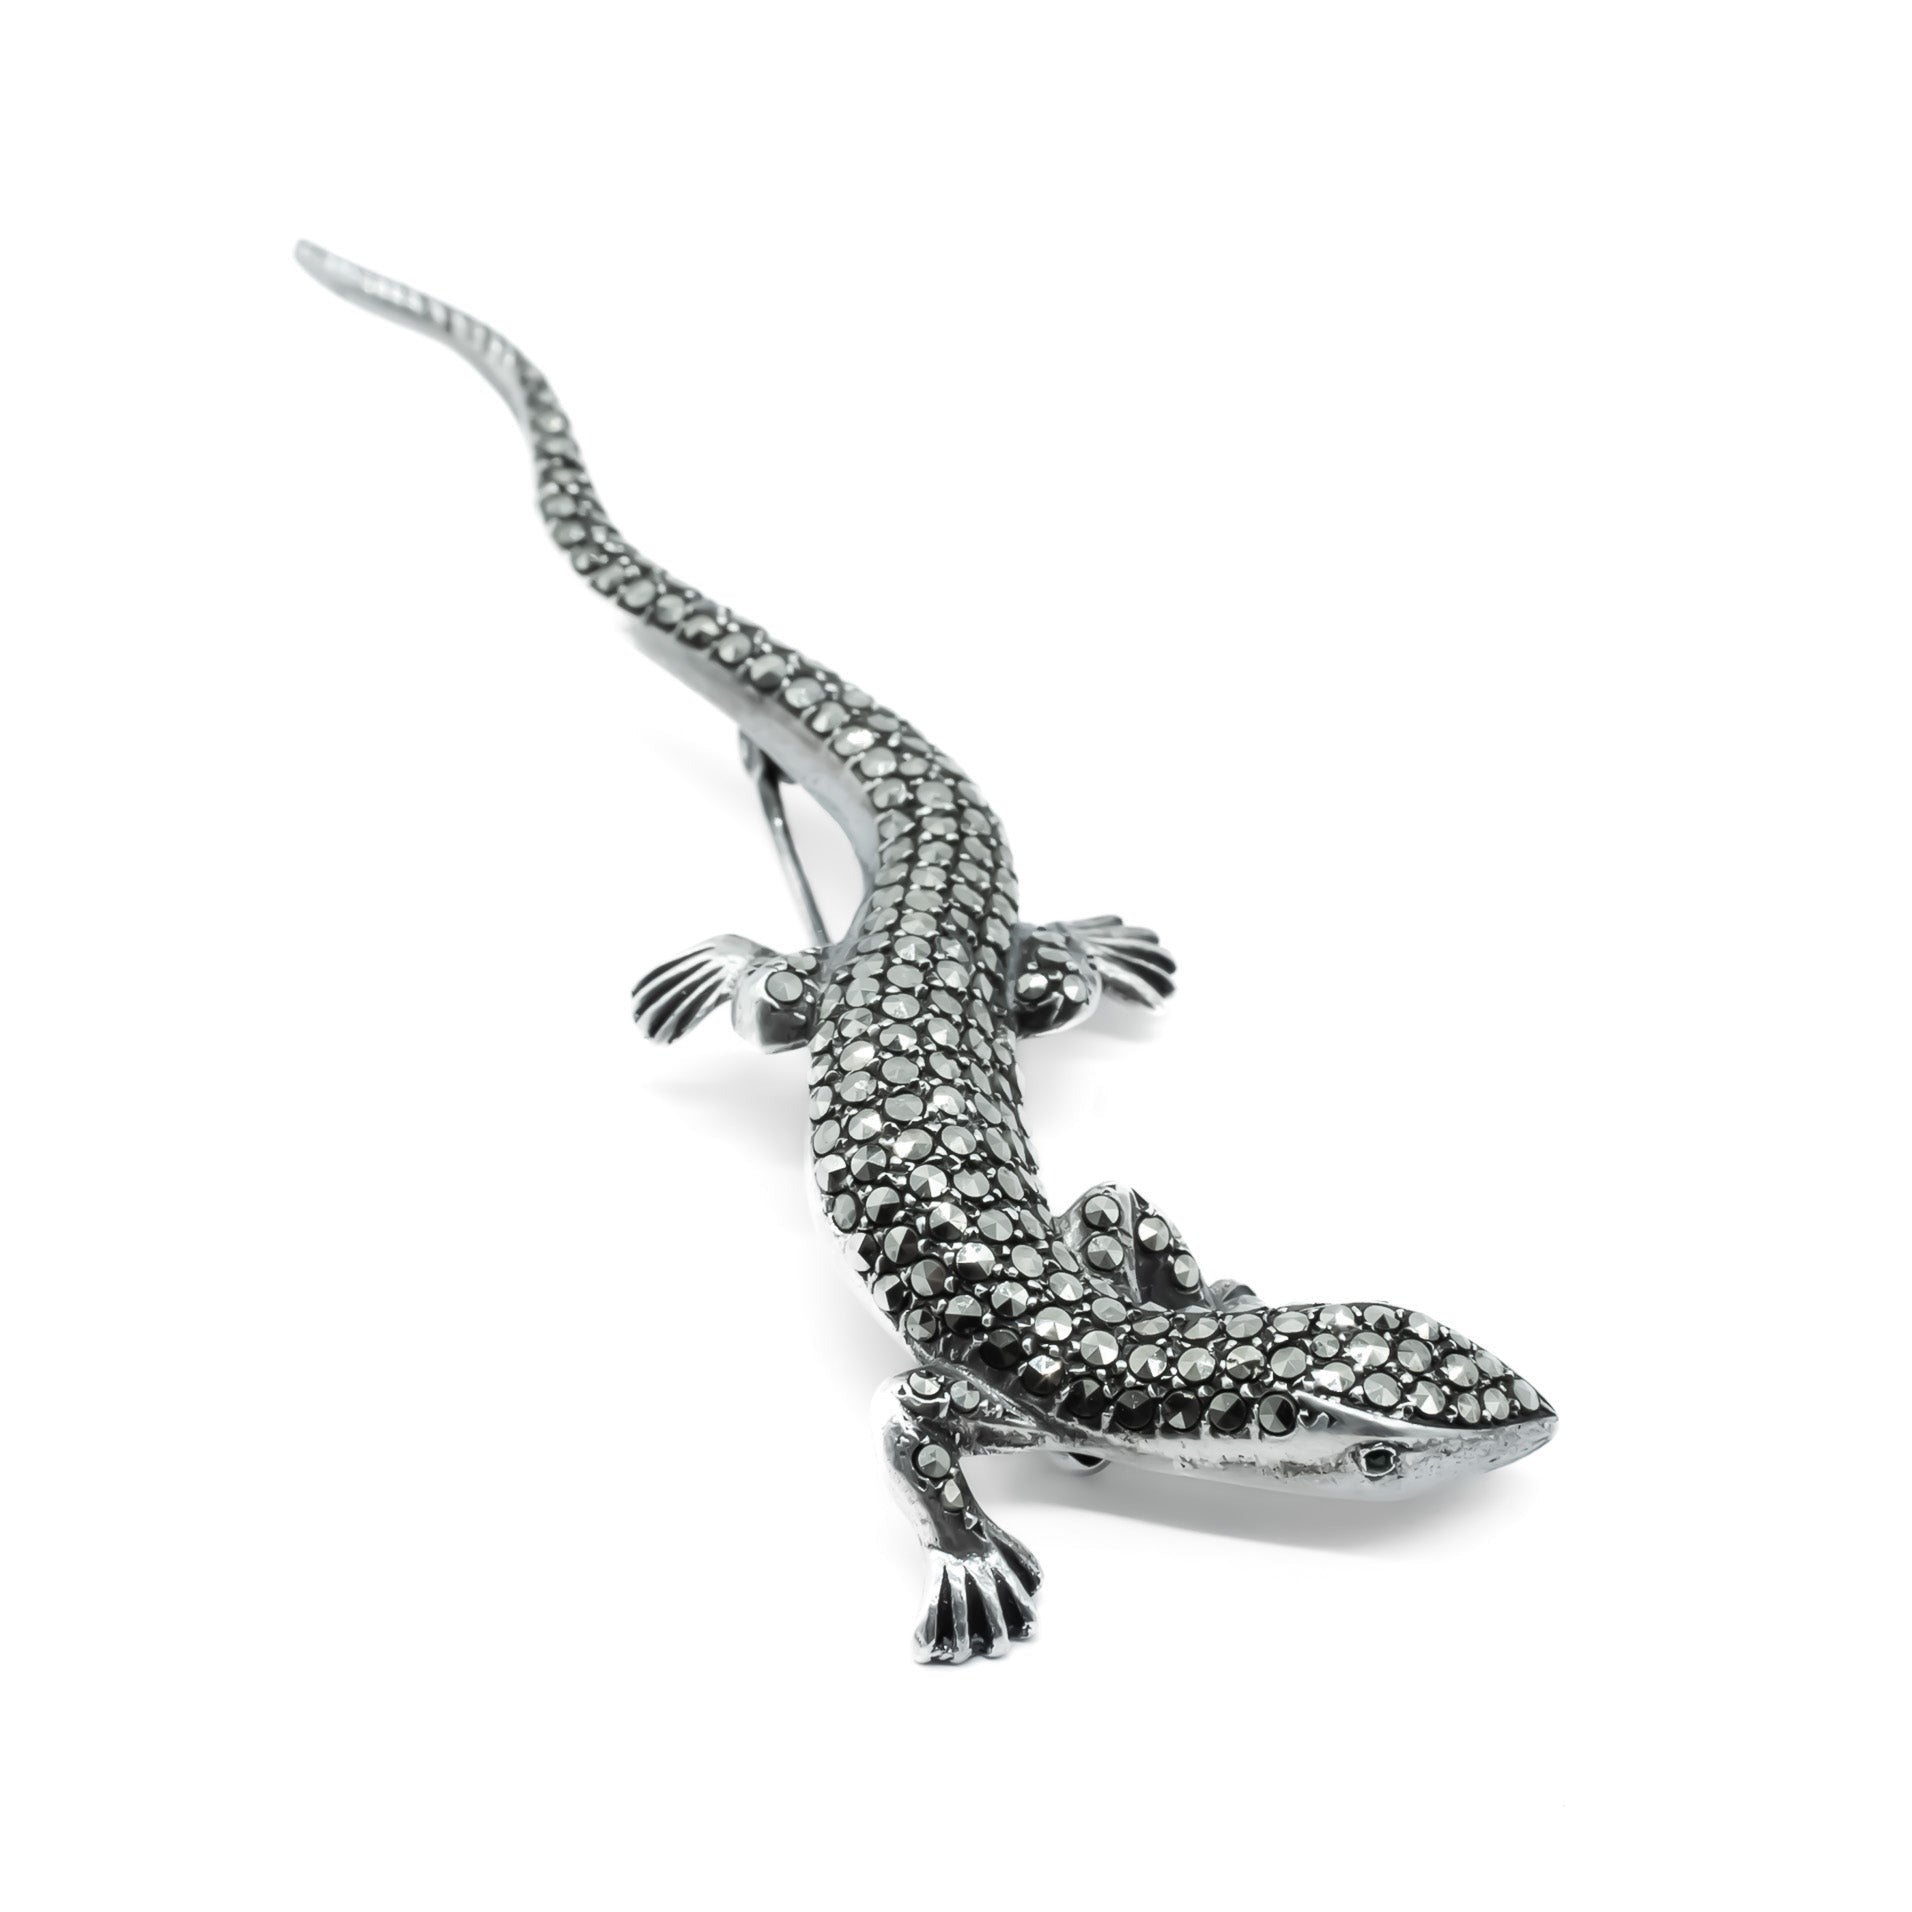 Stunning life-size lizard brooch set with lots of sparkling marcasites and green glass eyes. Circa 1930’s